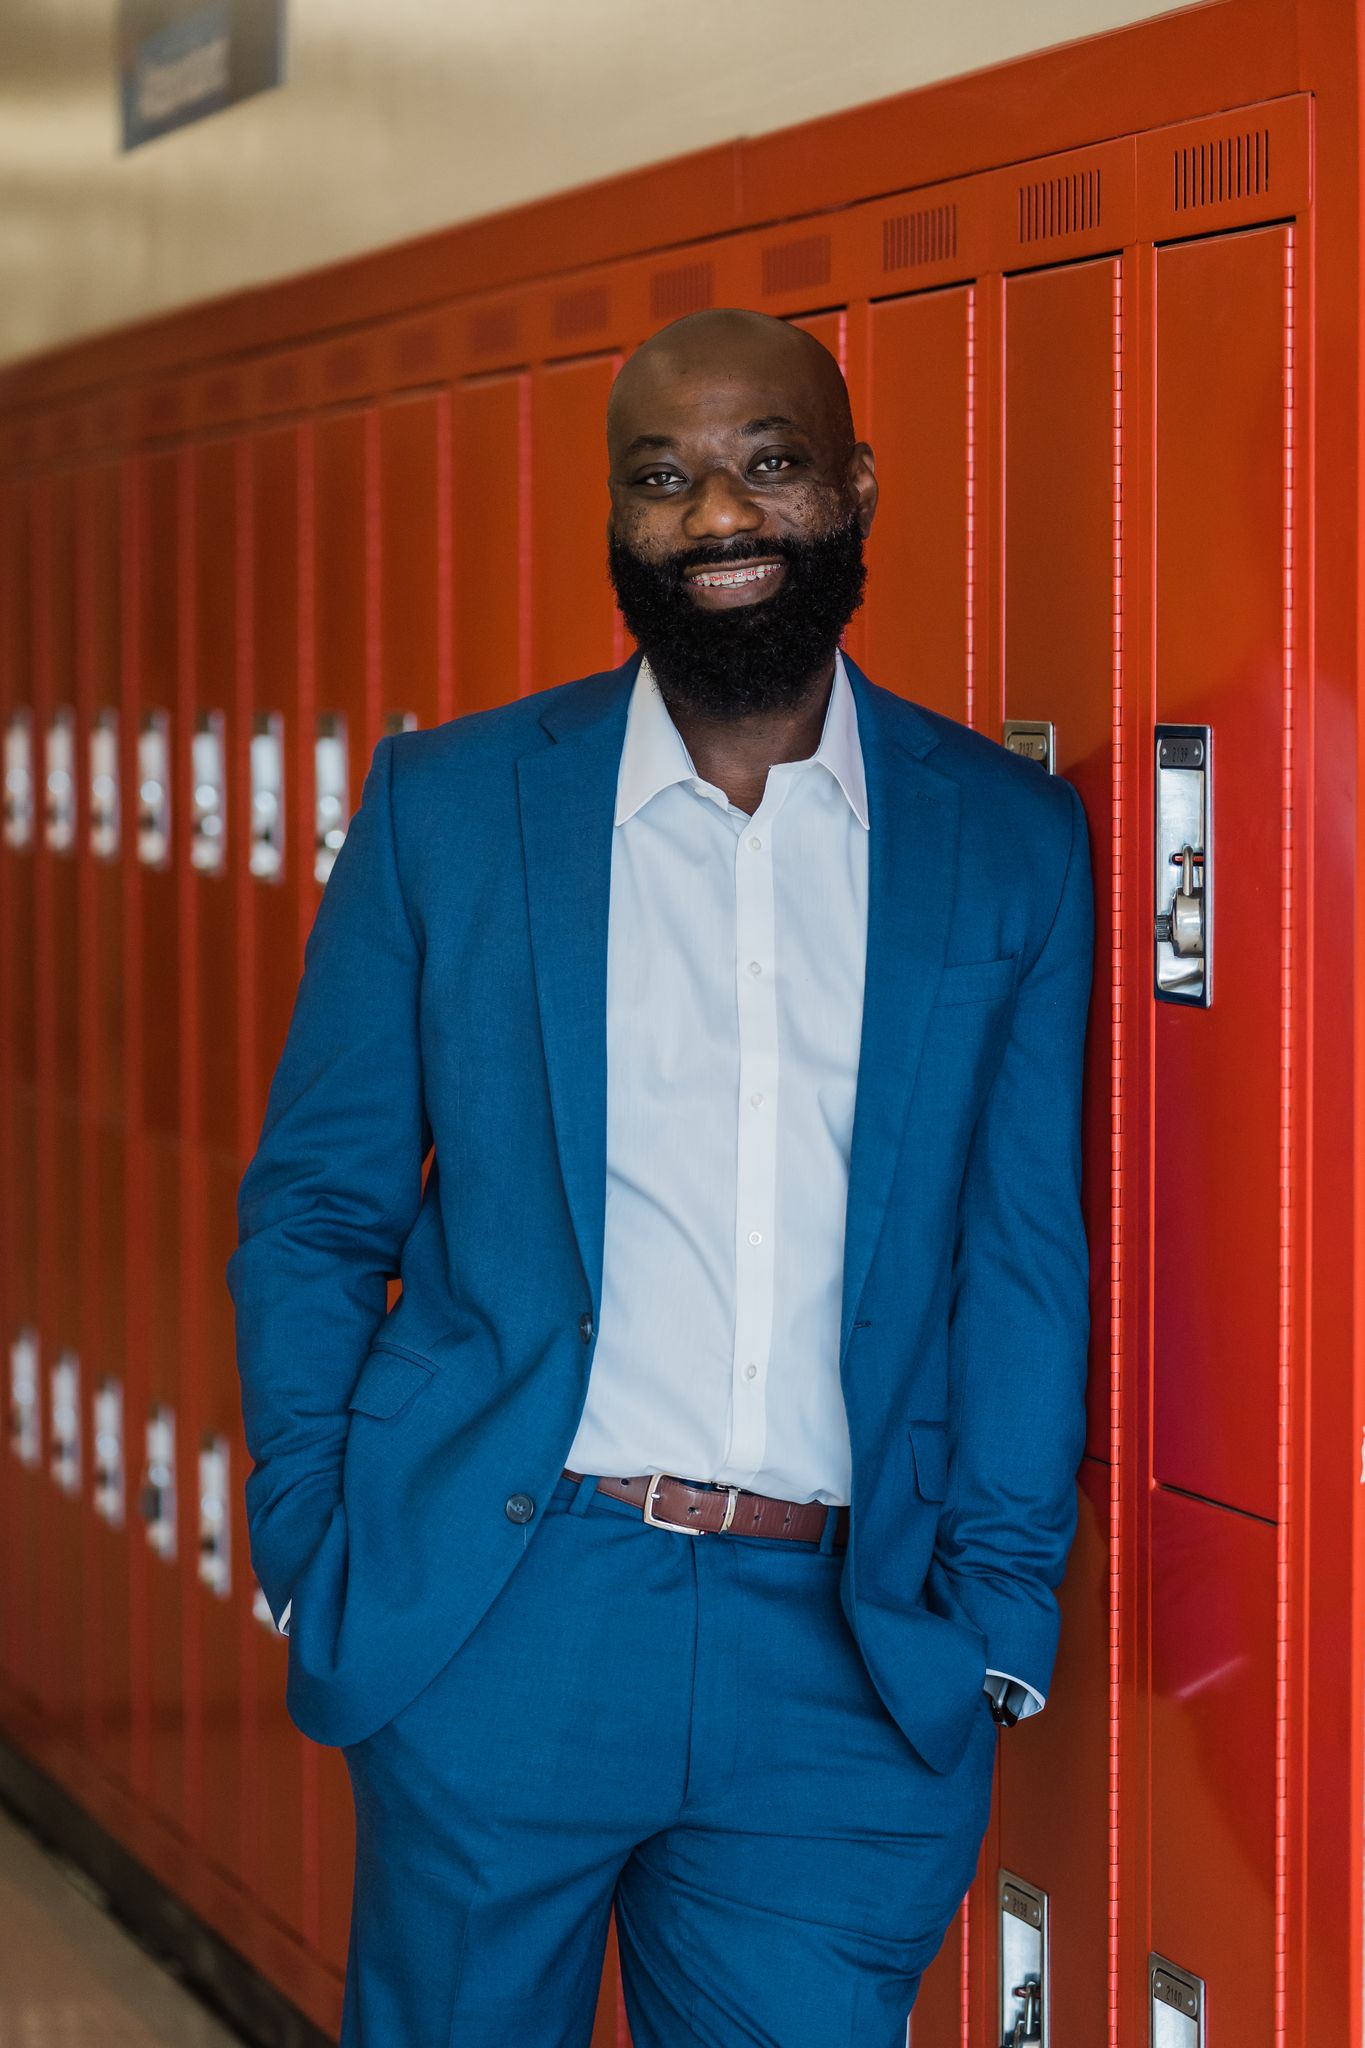 Dr. Marcus Gause leans against red lockers in the hallways of T. W. Andrews High School in High Point.